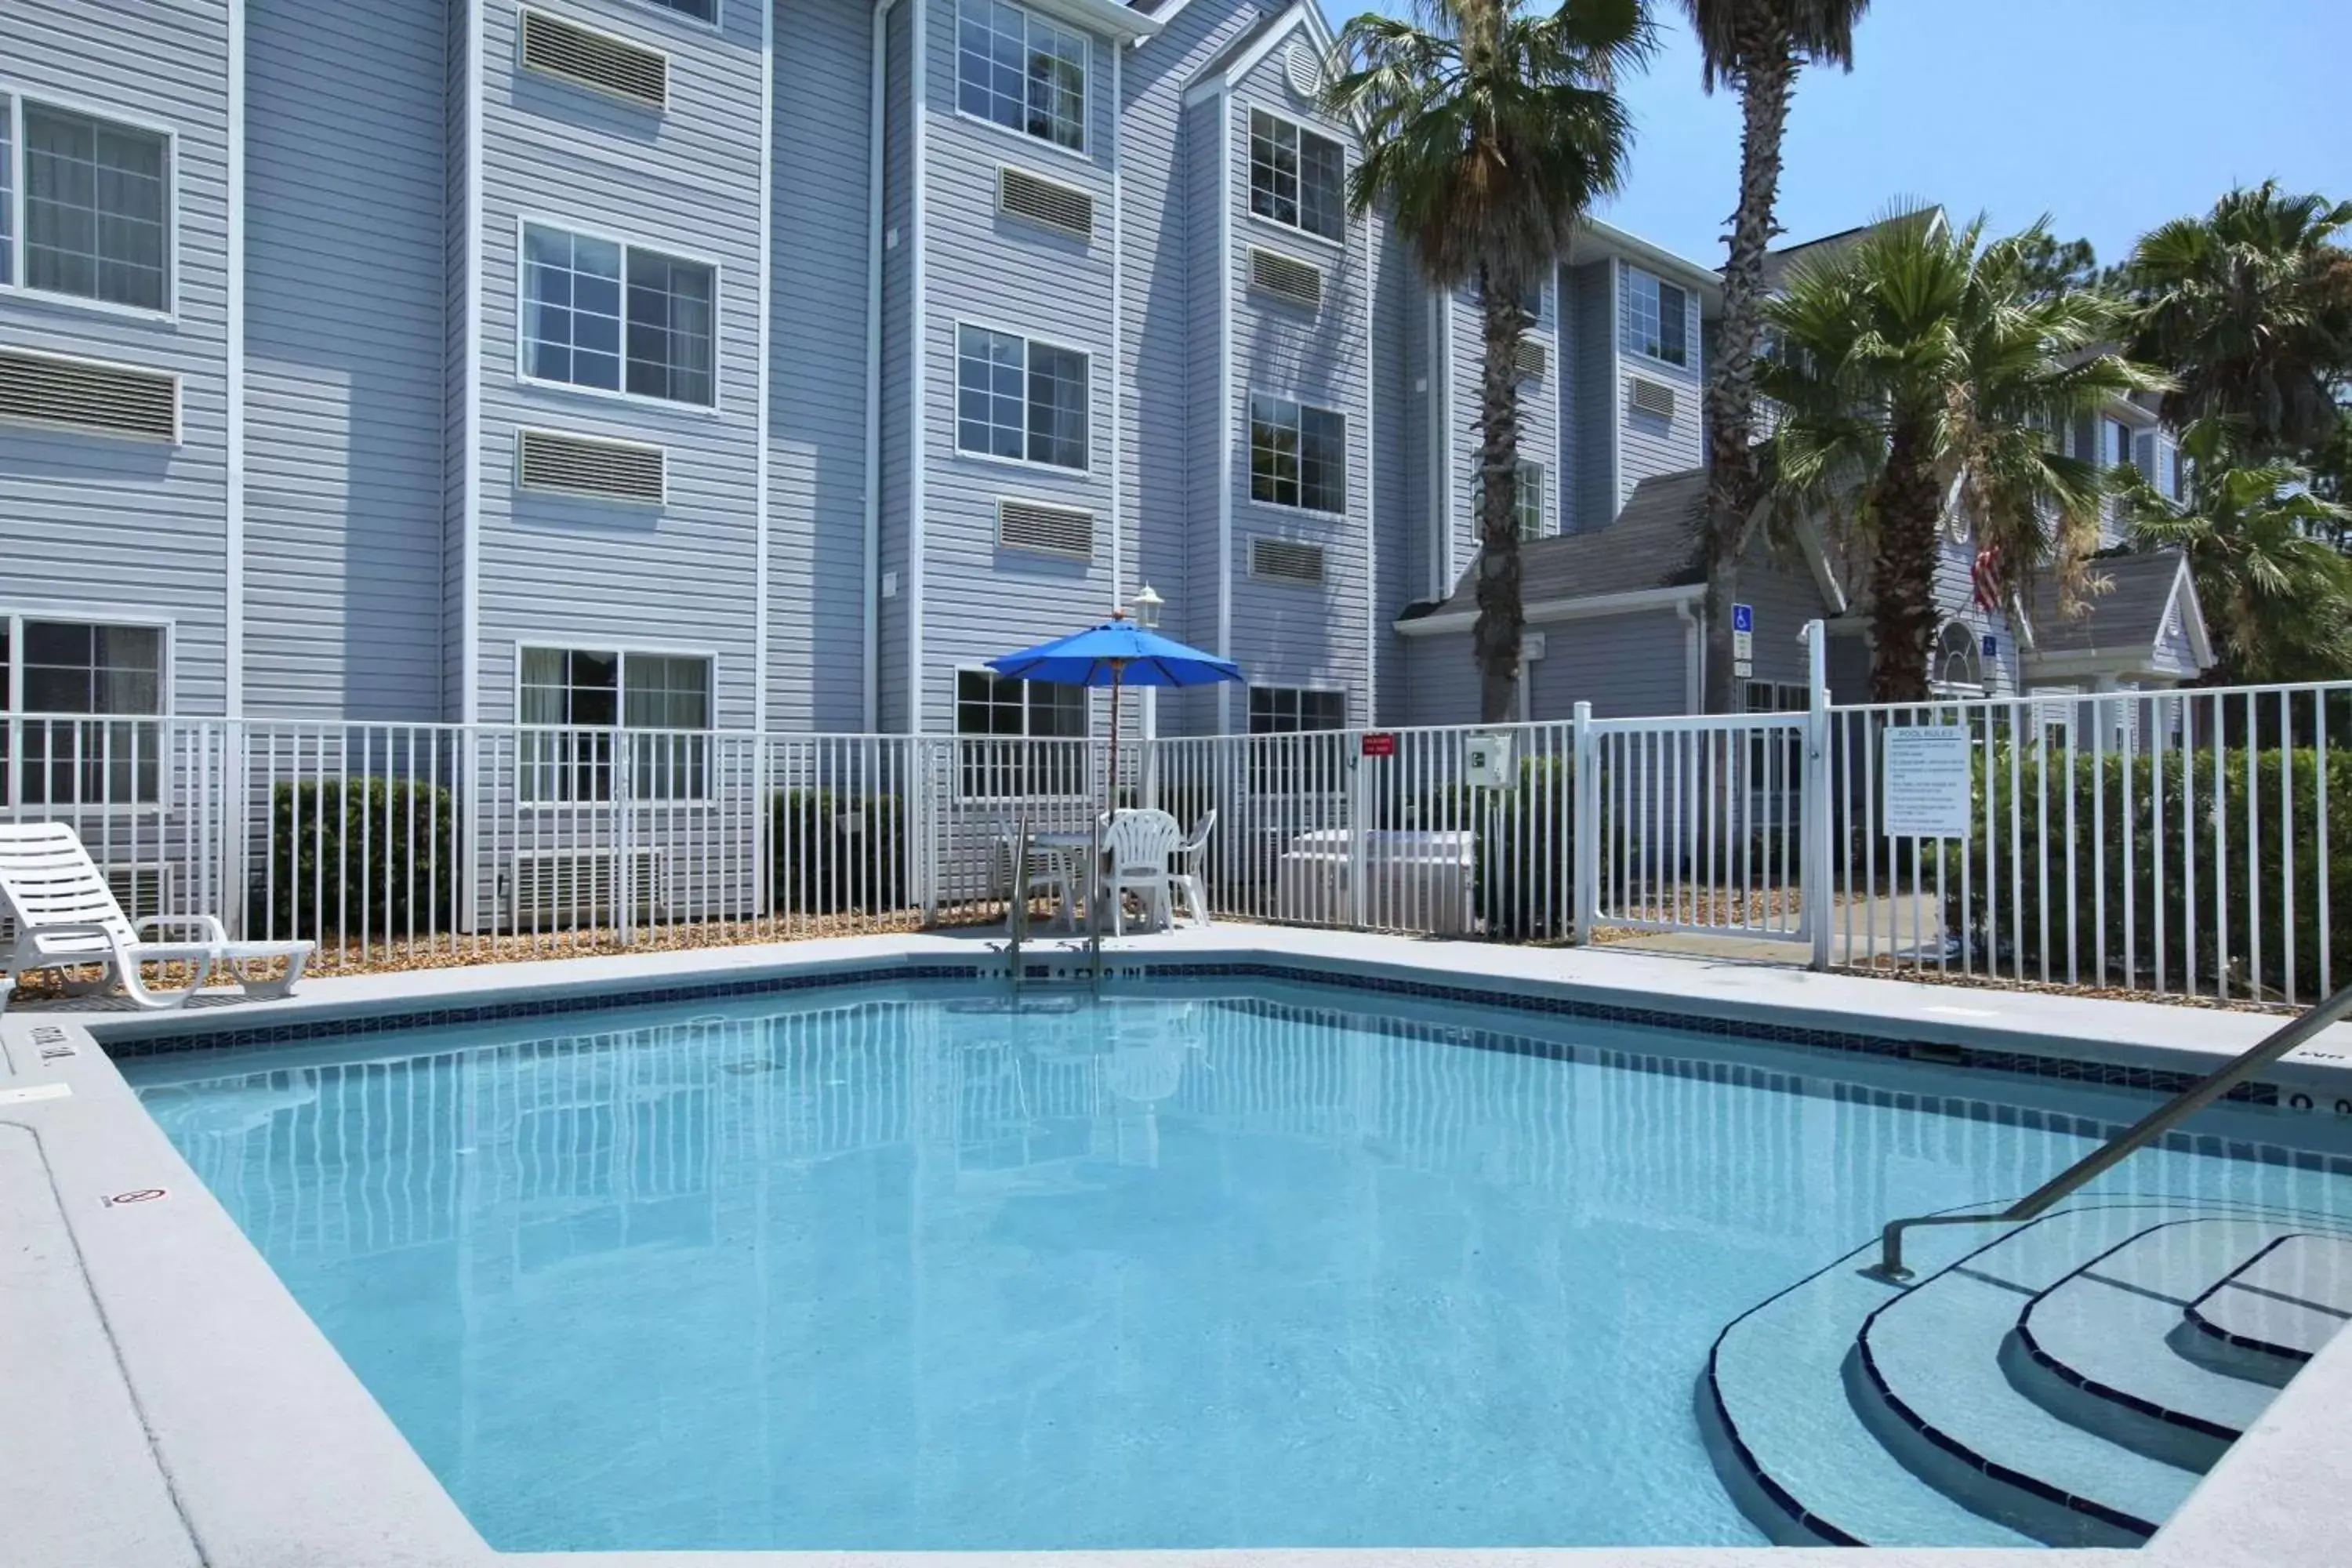 On site, Swimming Pool in Microtel Inn & Suites by Wyndham Palm Coast I-95